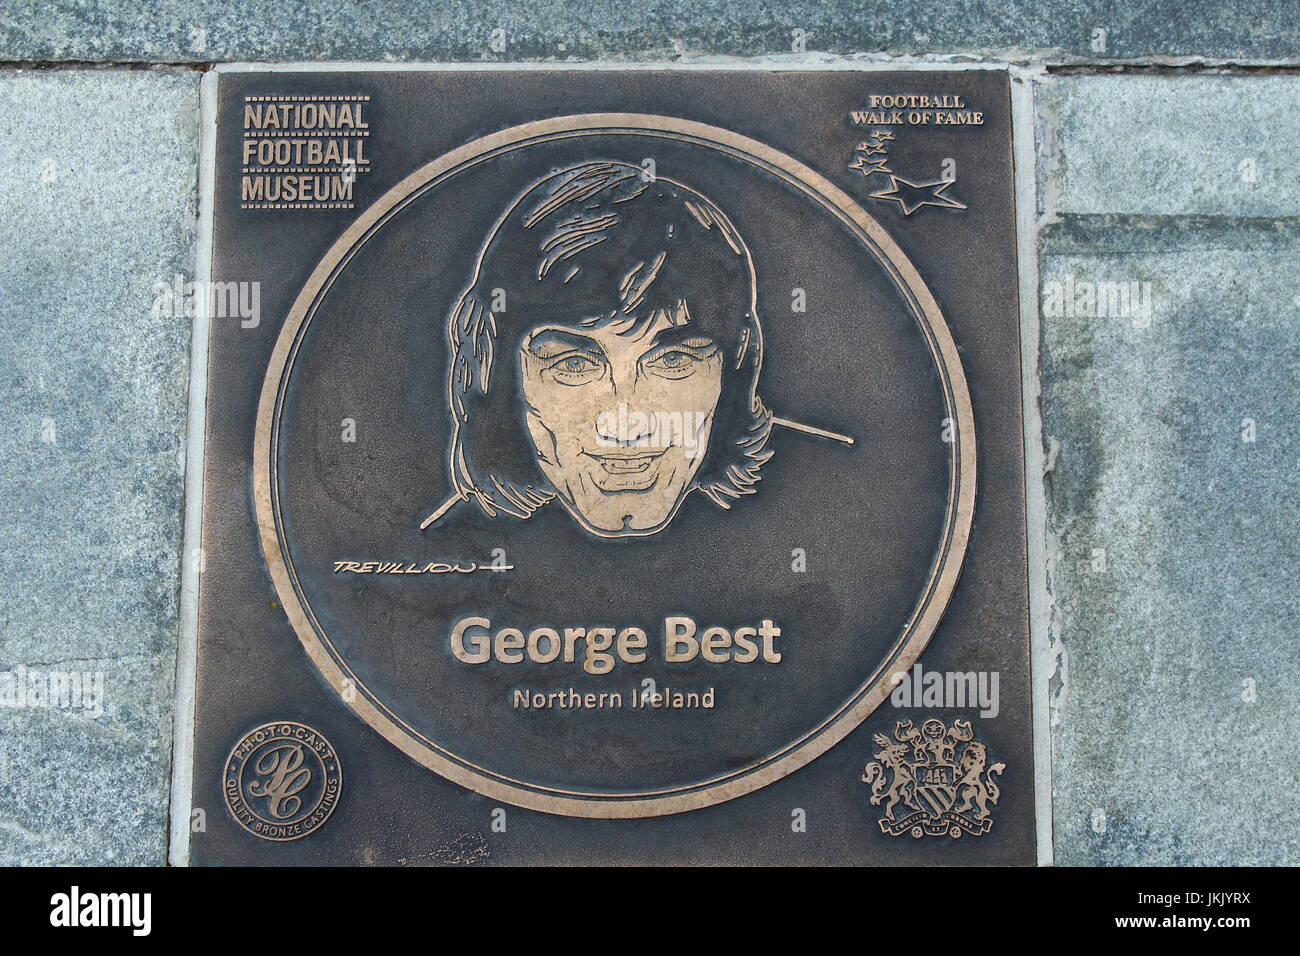 George Best bronze plaque on the Football Walk of Fame at the National Football Museum, Manchester, England Stock Photo